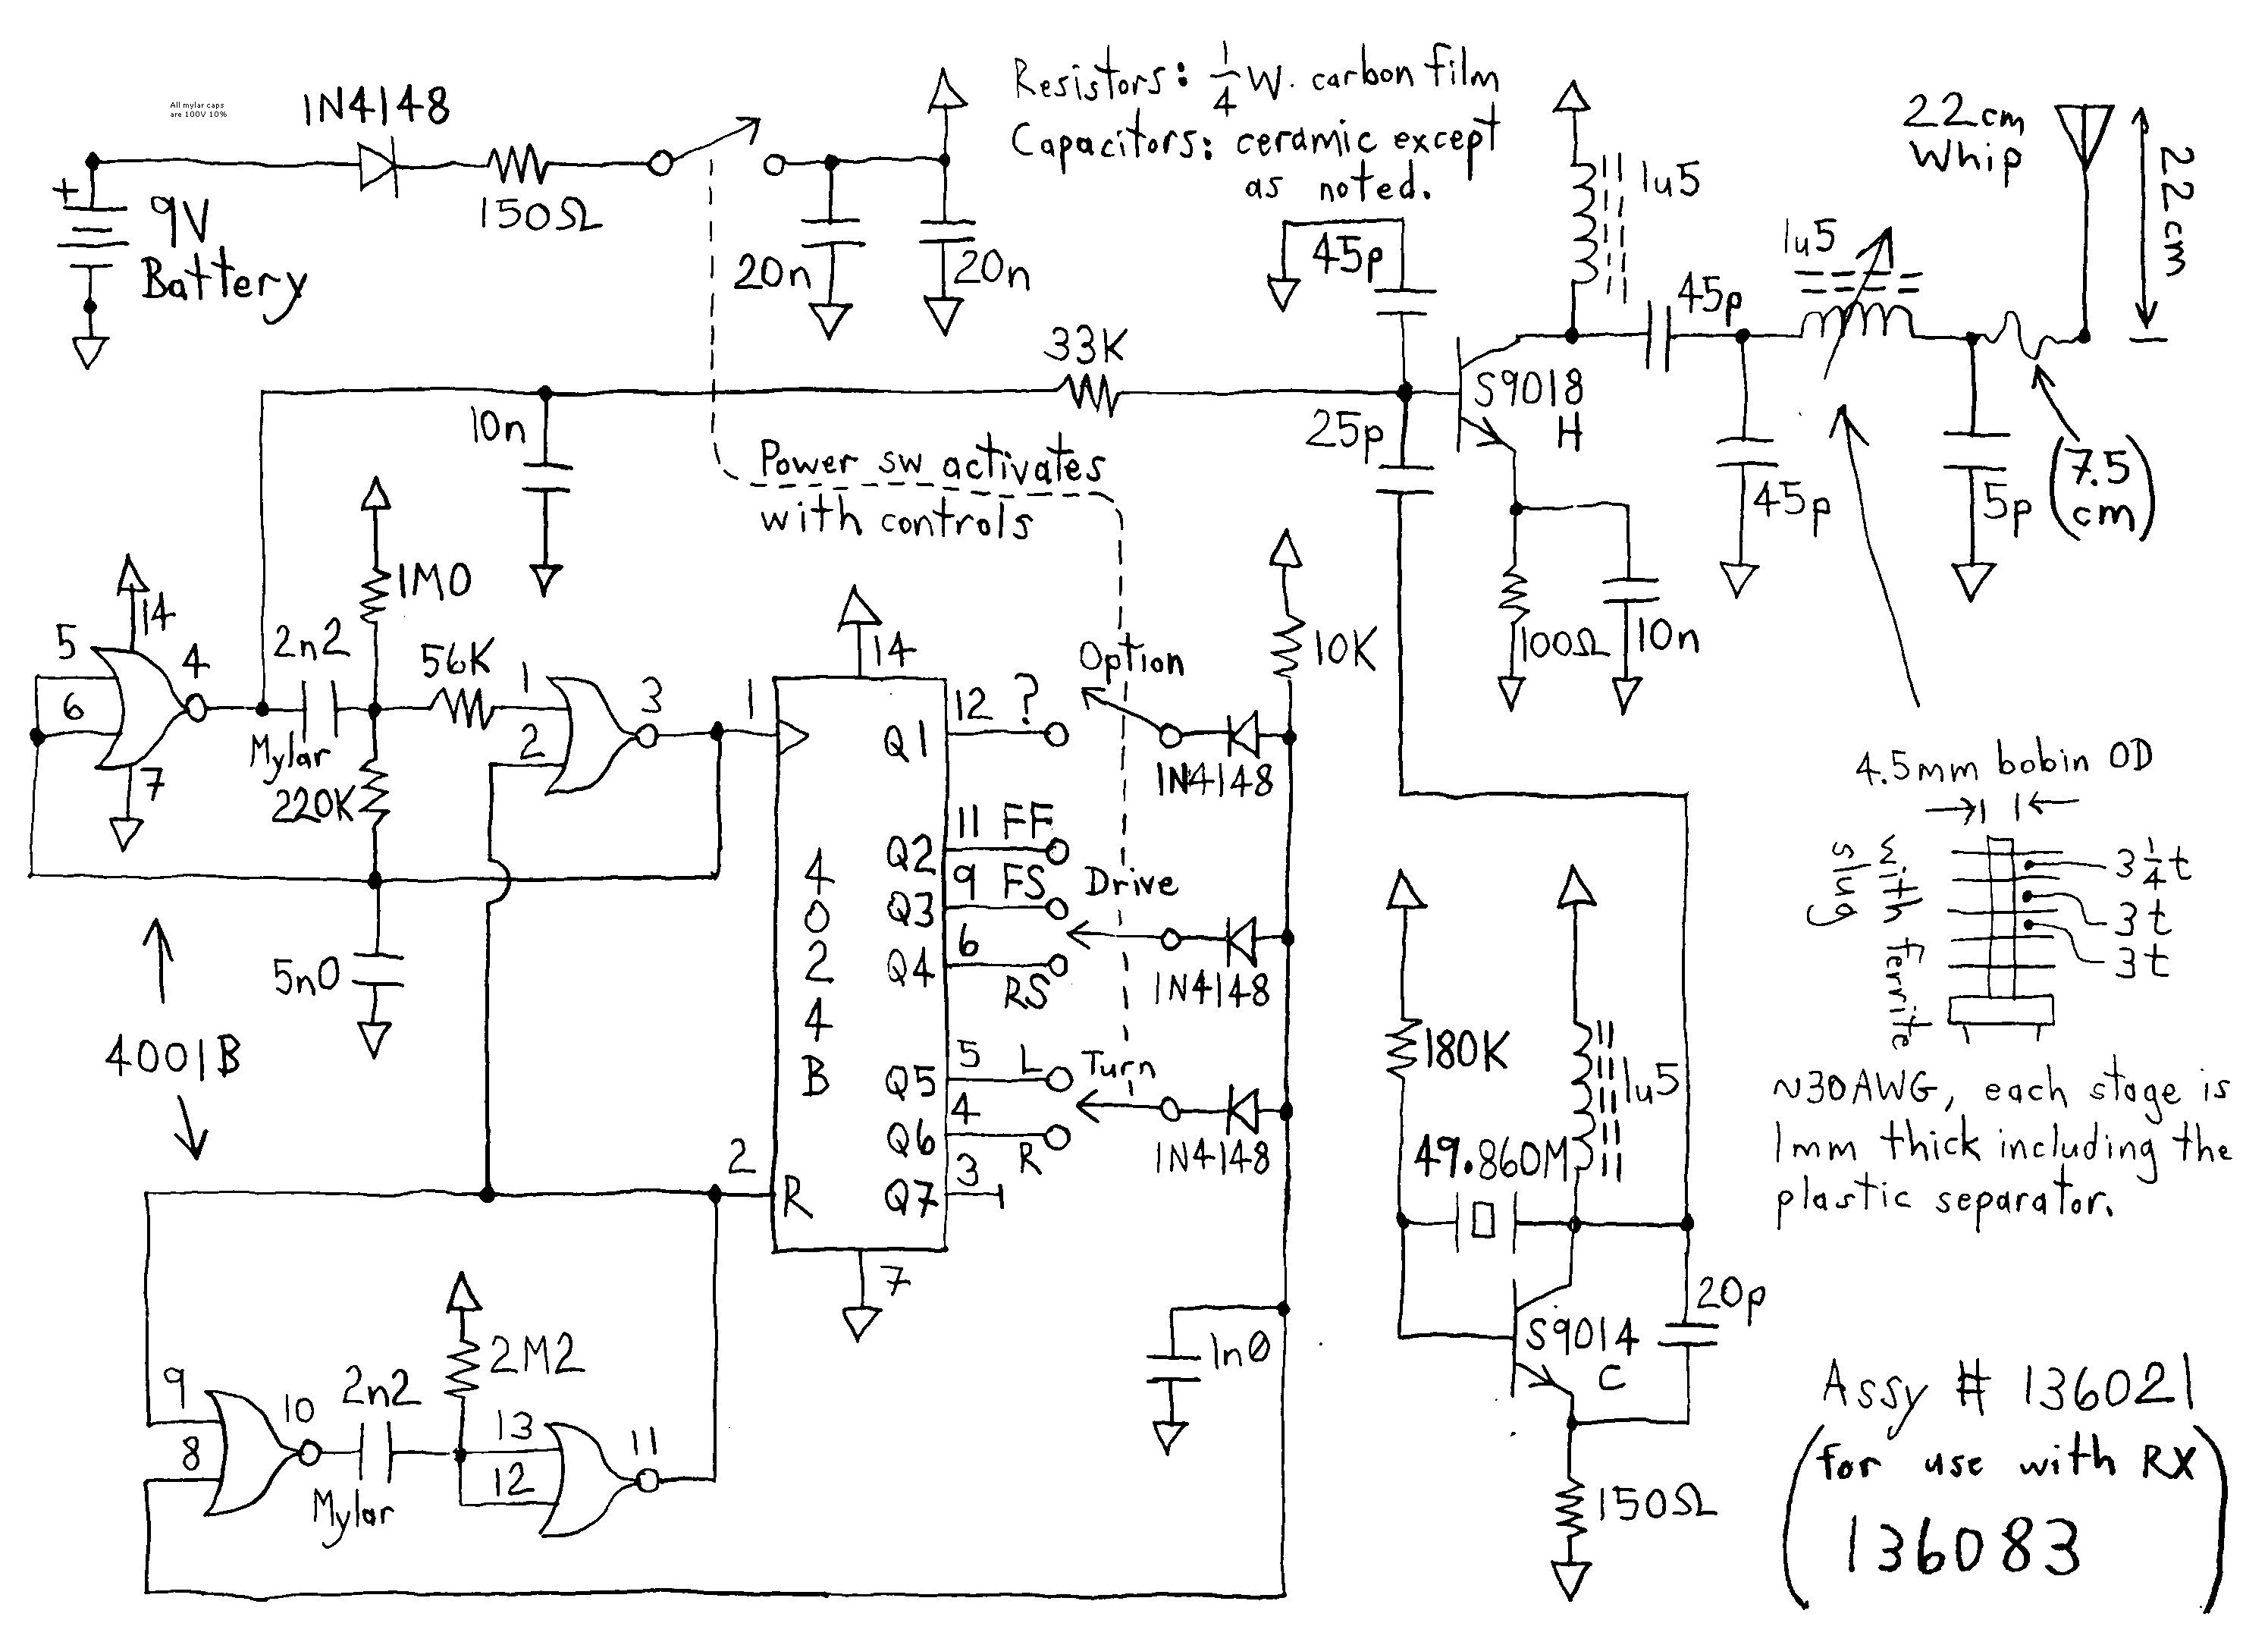 Wiring Diagram Current Relay New Wiring An Automotive Relay Diagram Fresh Wire Diagram Symbols